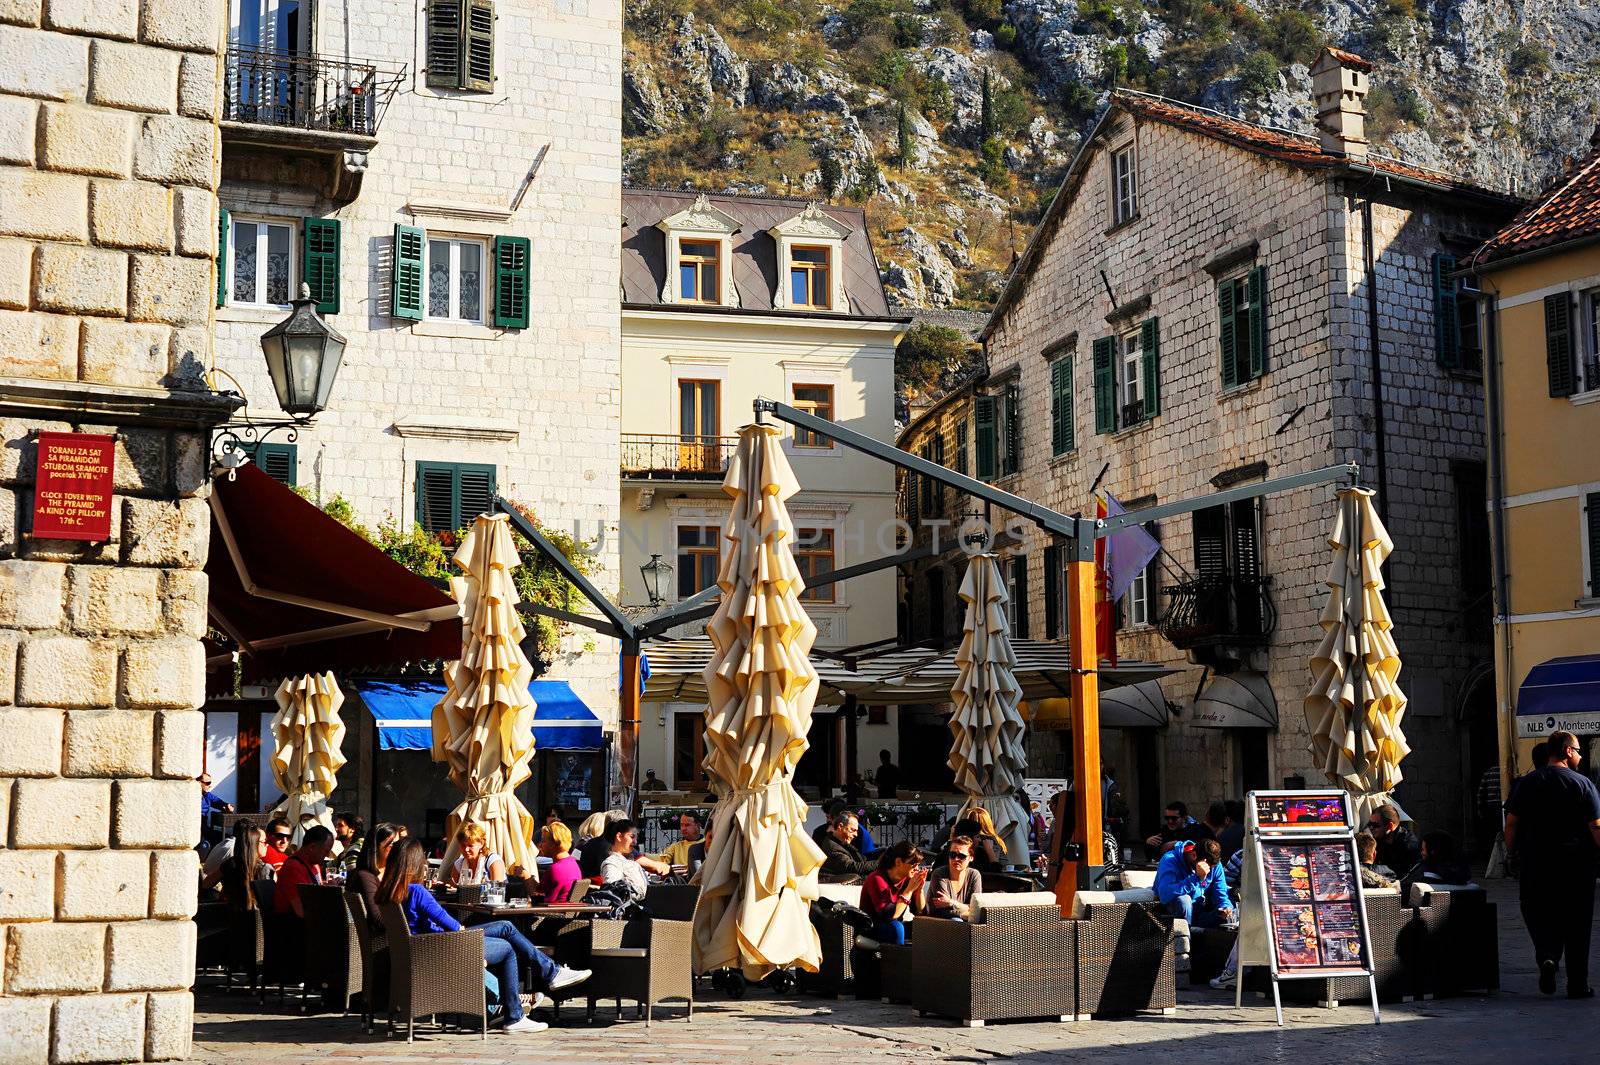 Kotor, Montenegro - November 3, 2011: Street cafe in Kotor old town. Kotor has one of the best preserved medieval old towns in the Adriatic and is a UNESCO world heritage site.